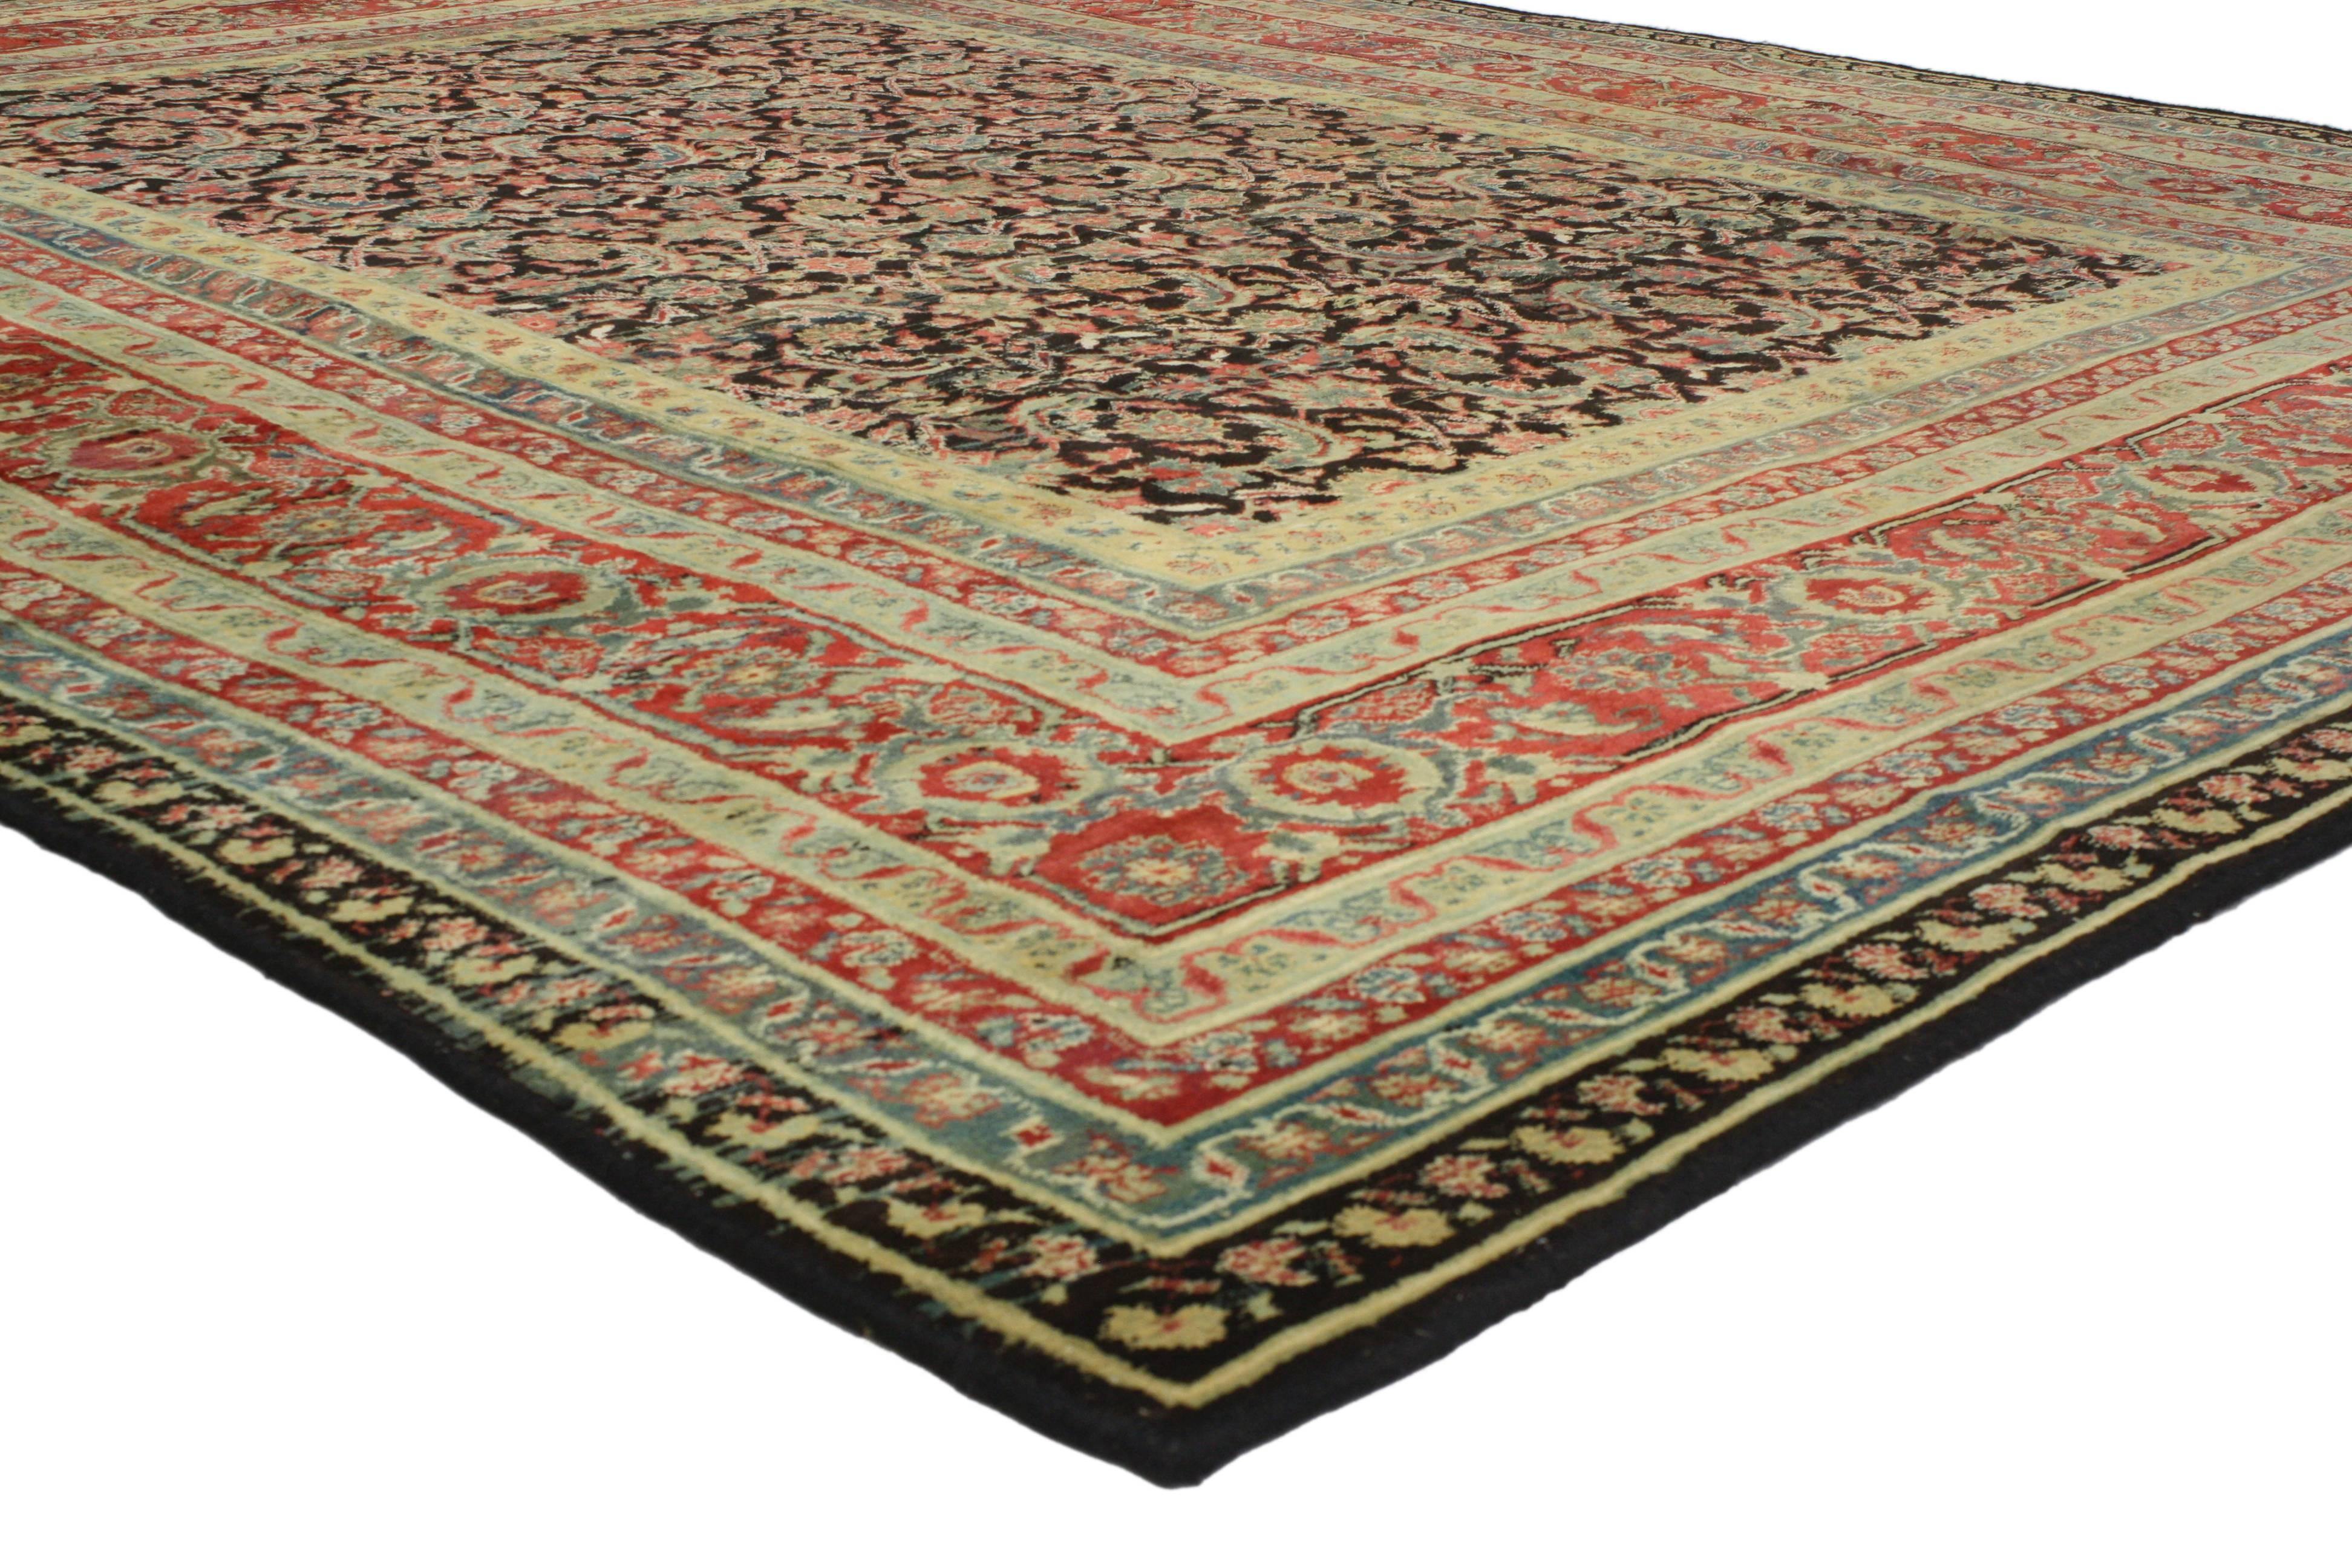 Intriguing, appealing and beautifully designed, this vintage Indian Agra rug with modern traditional style showcases some of the finer points when it comes to Indian culture. Features an all-over and repetitive geometric pattern on an abrashed black